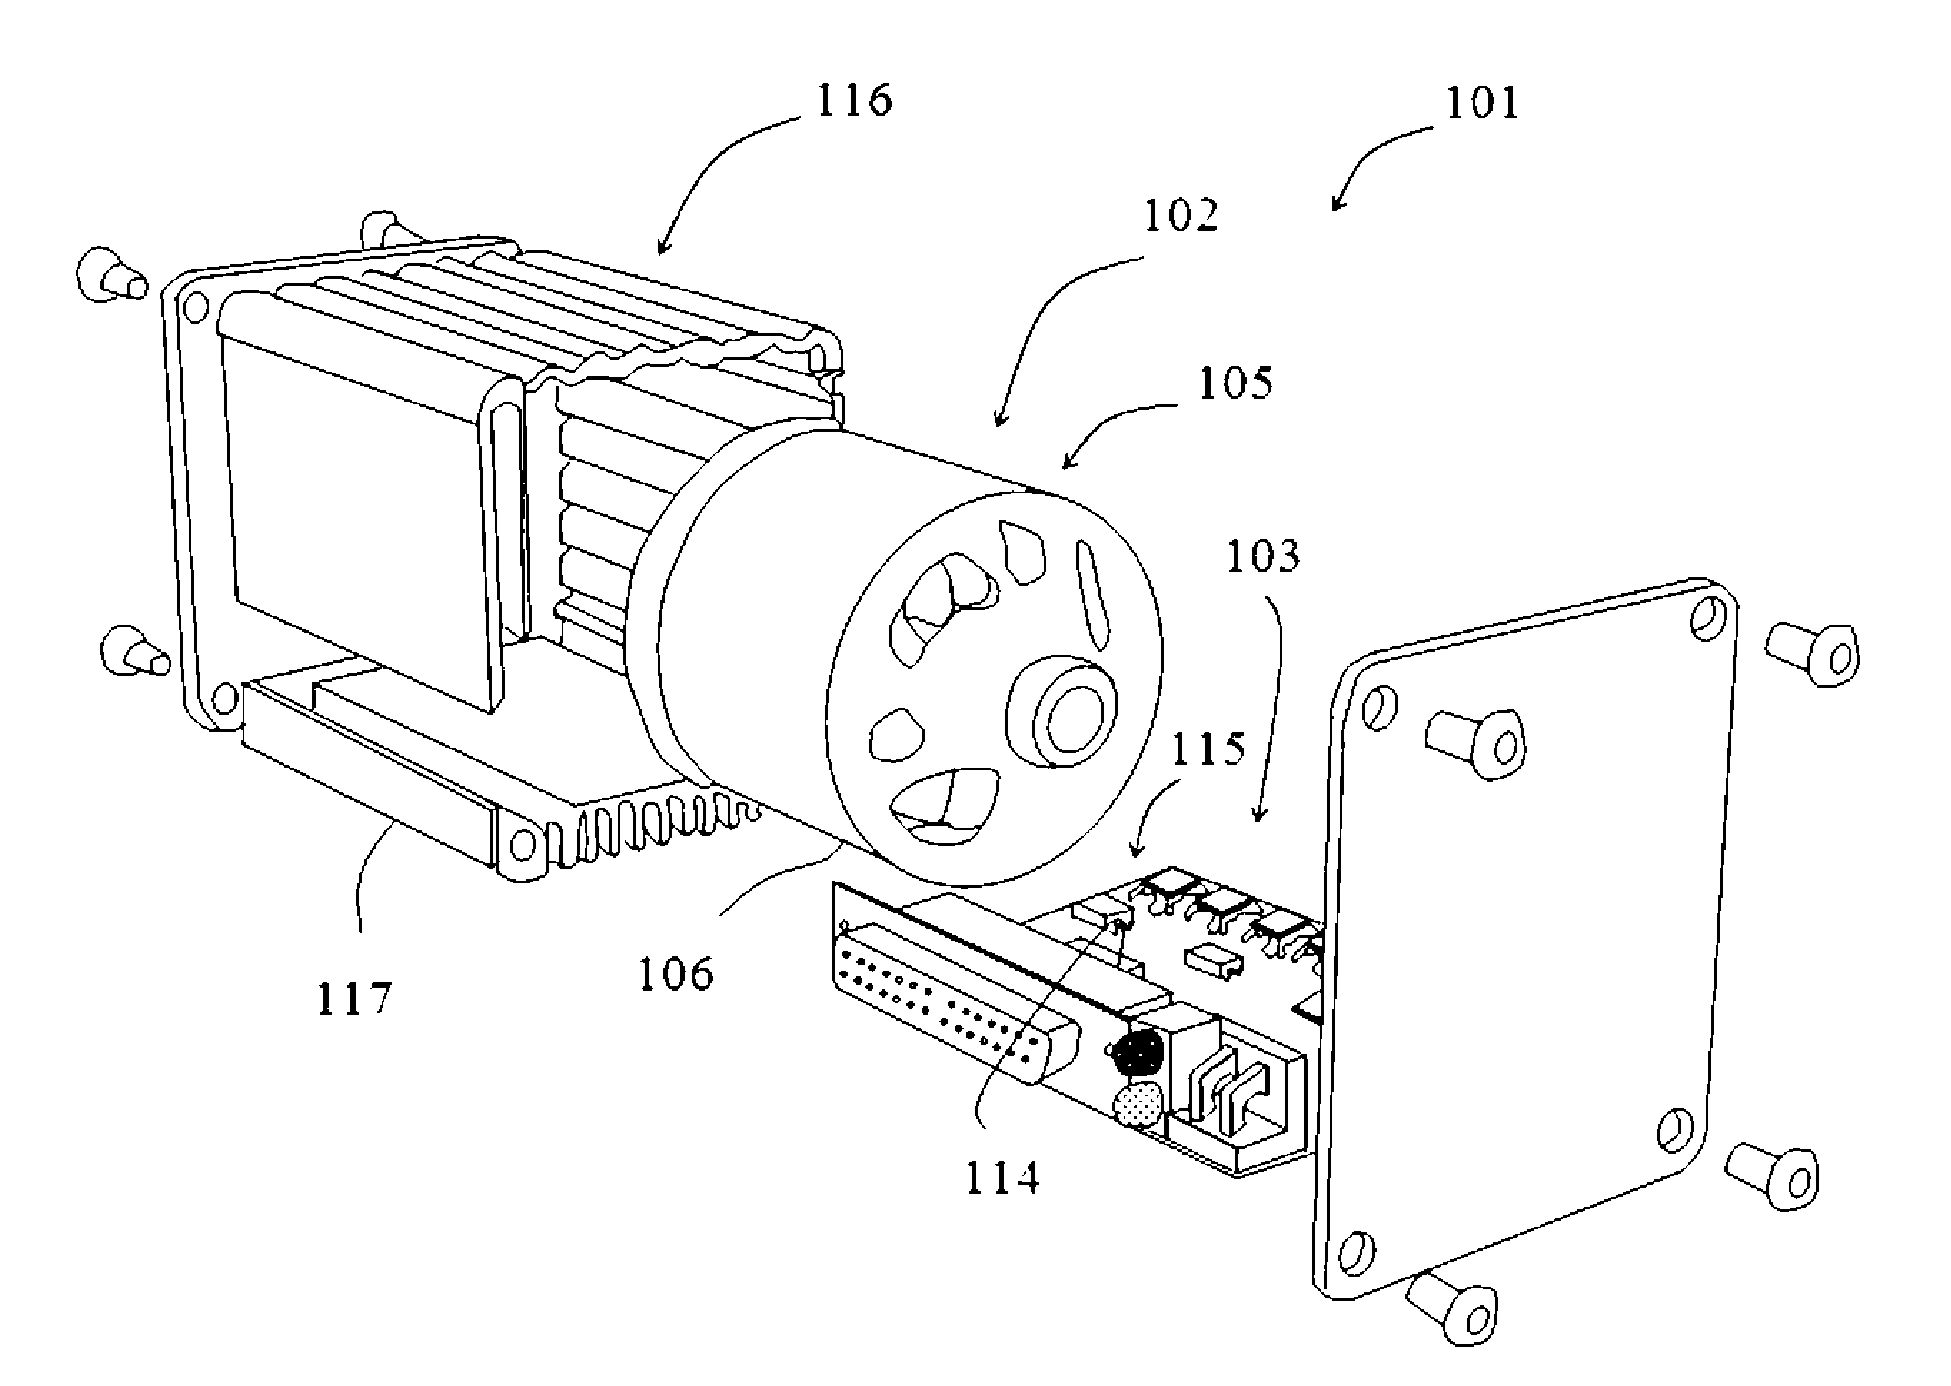 Motor assembly comprising a brushless DC motor with control electronics